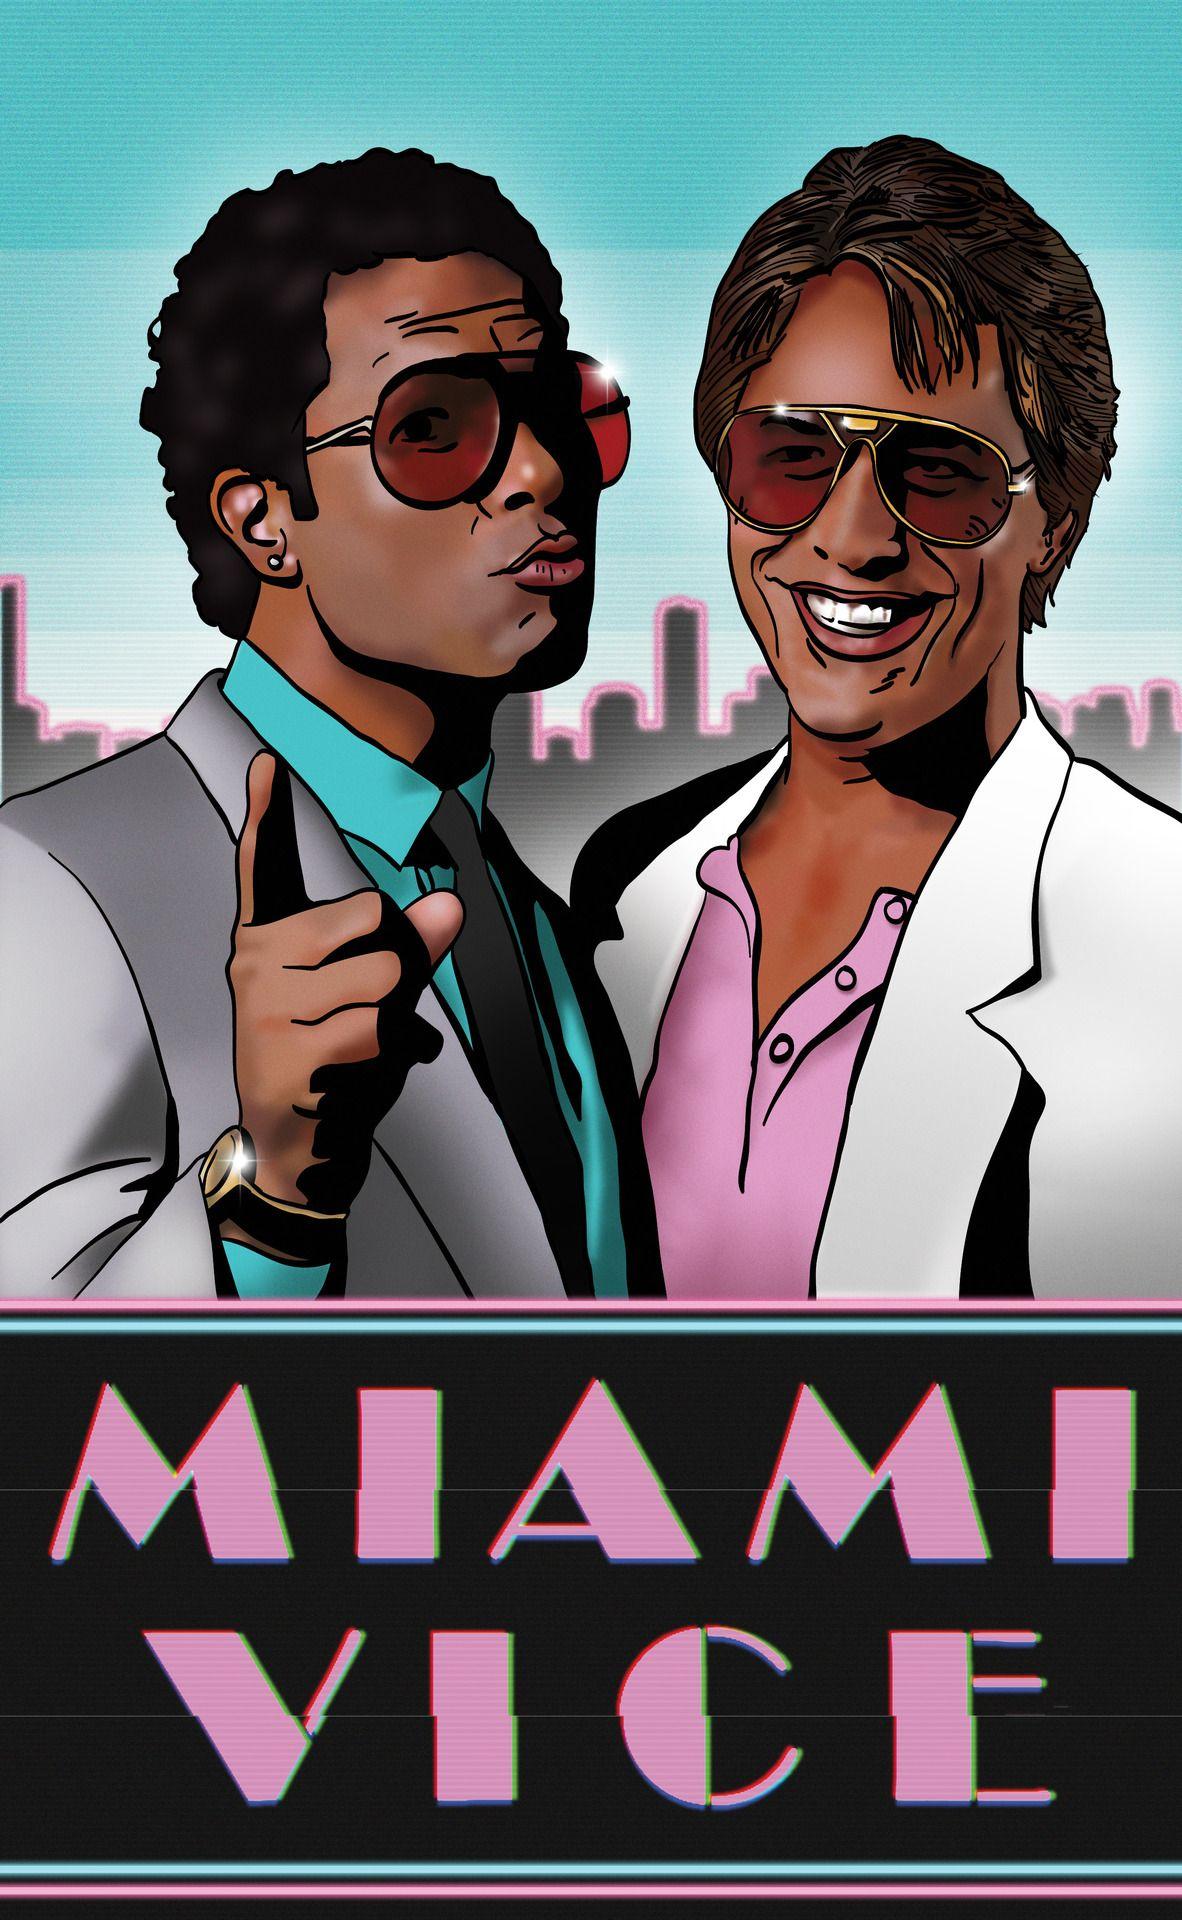 Miami Vice by Akber Ahmed. I Love the 80s. Miami